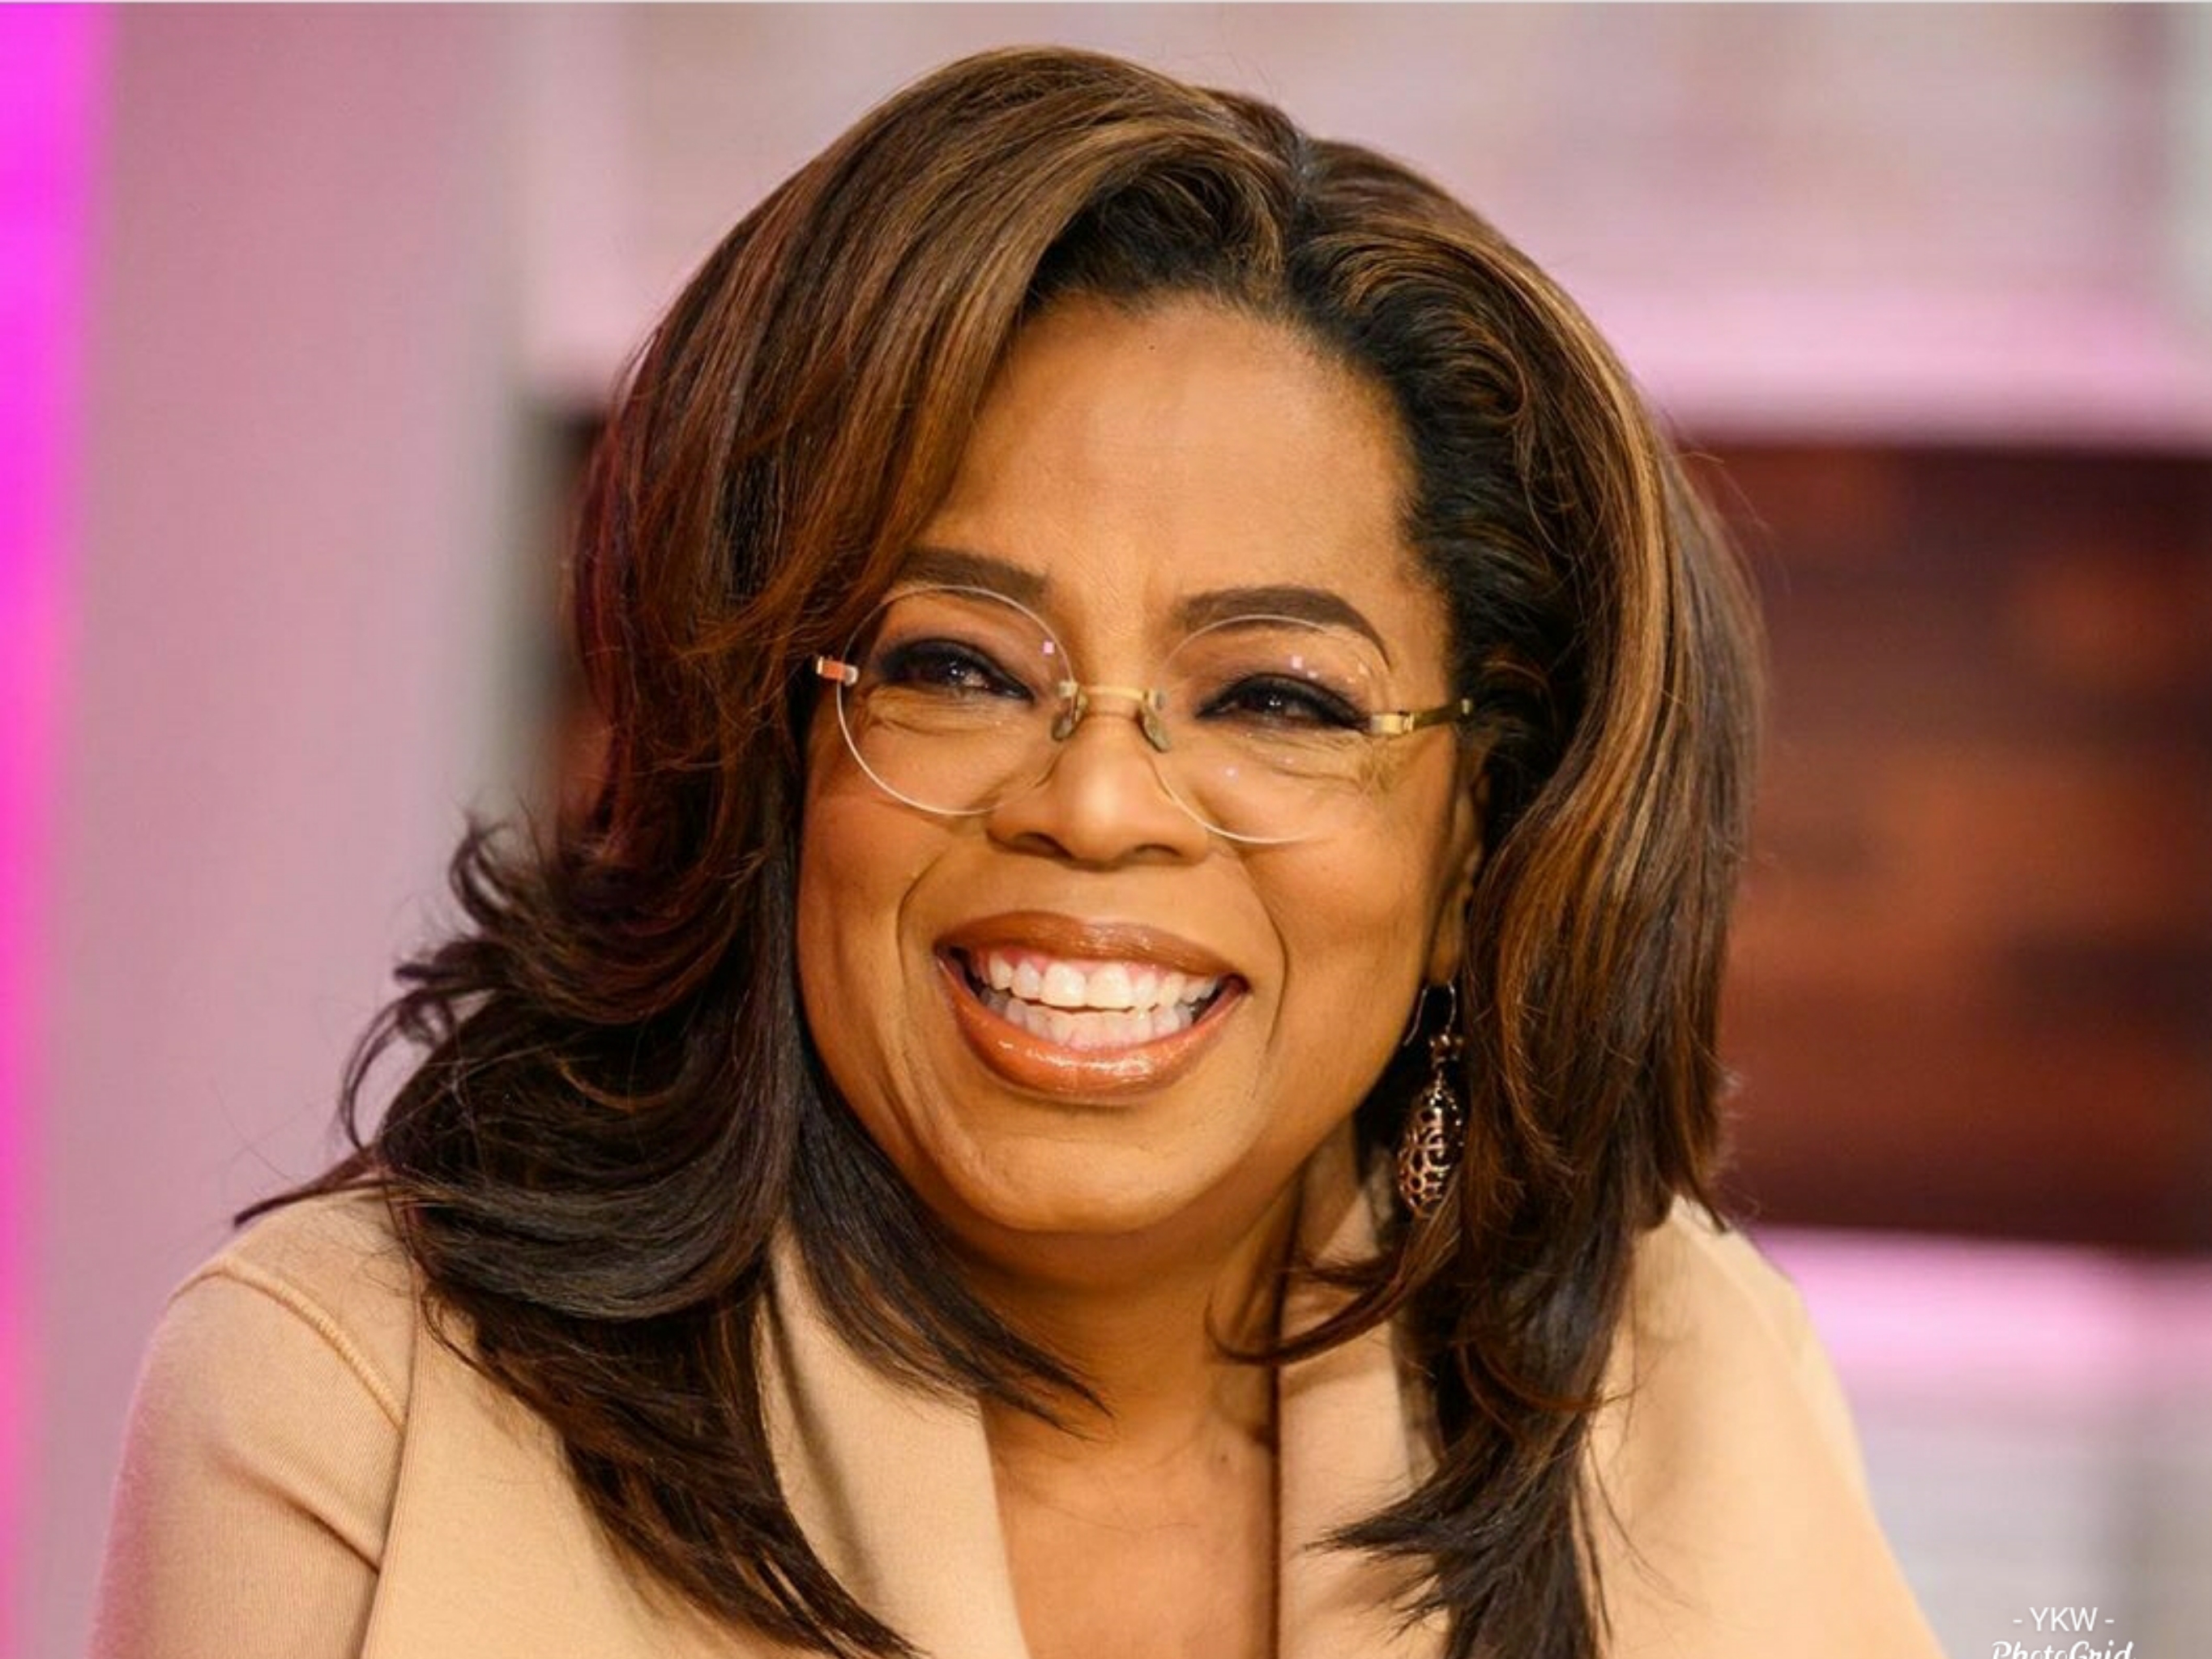 Oprah Donating $12 Million To Communities In Her “Home Cities” That Have Been Impacted By The Pandemic